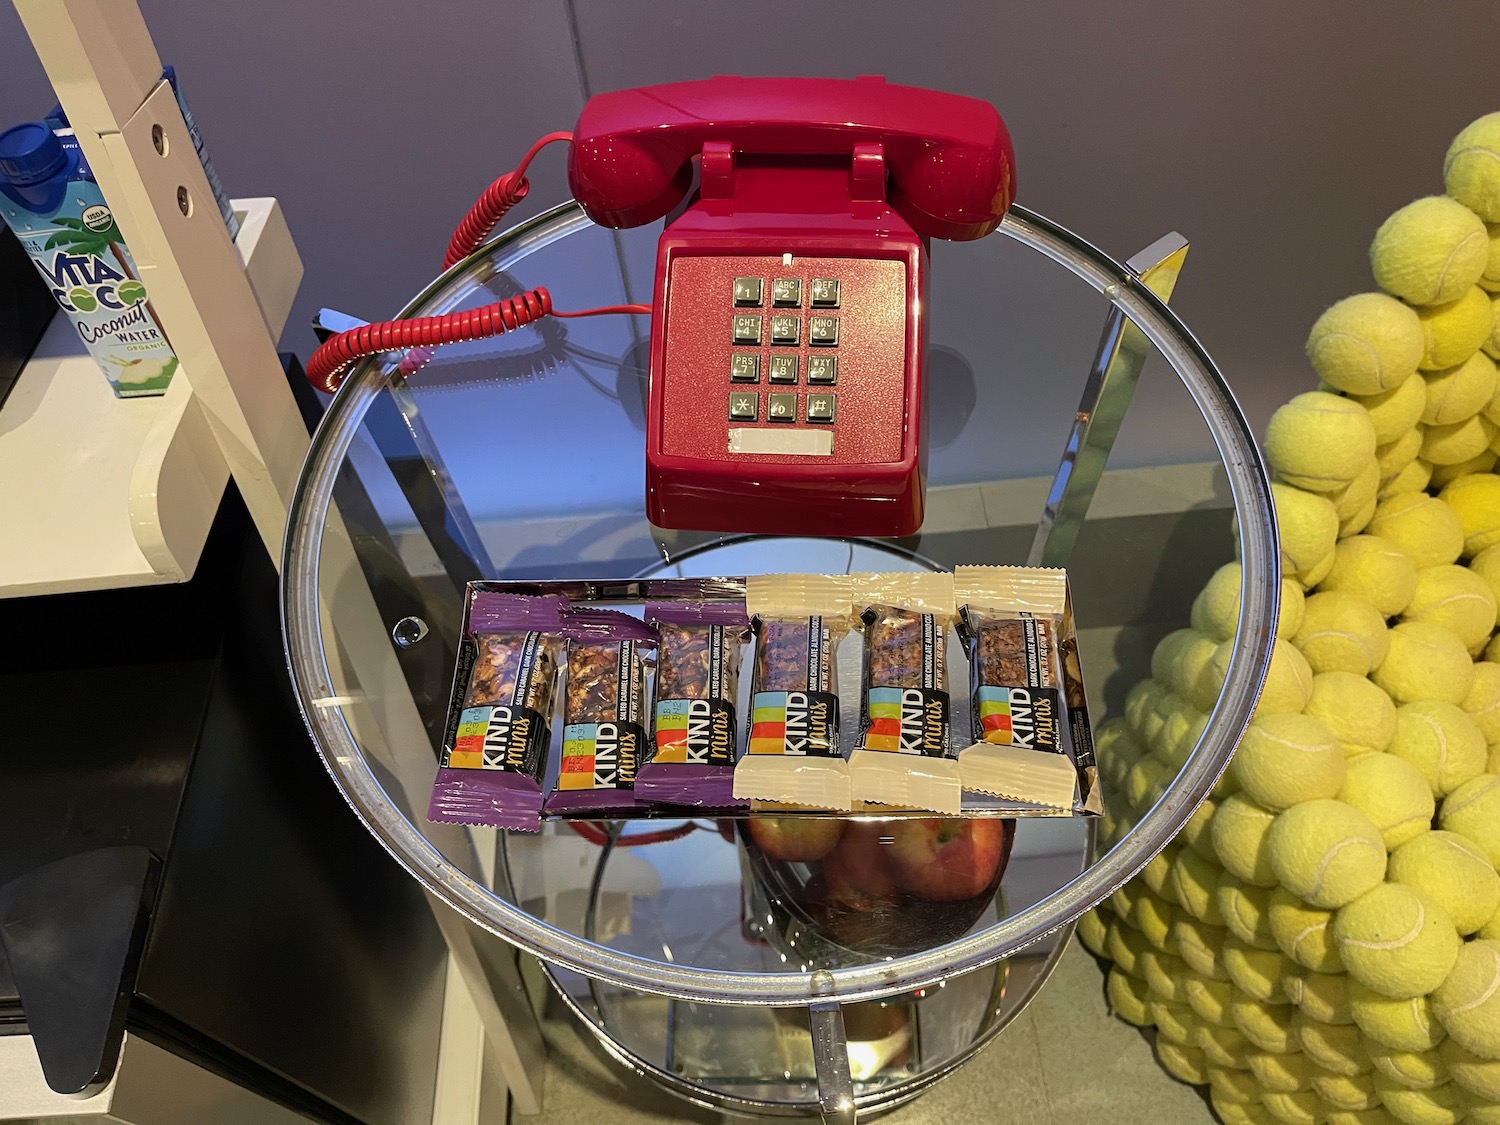 a telephone and candy bars on a glass table